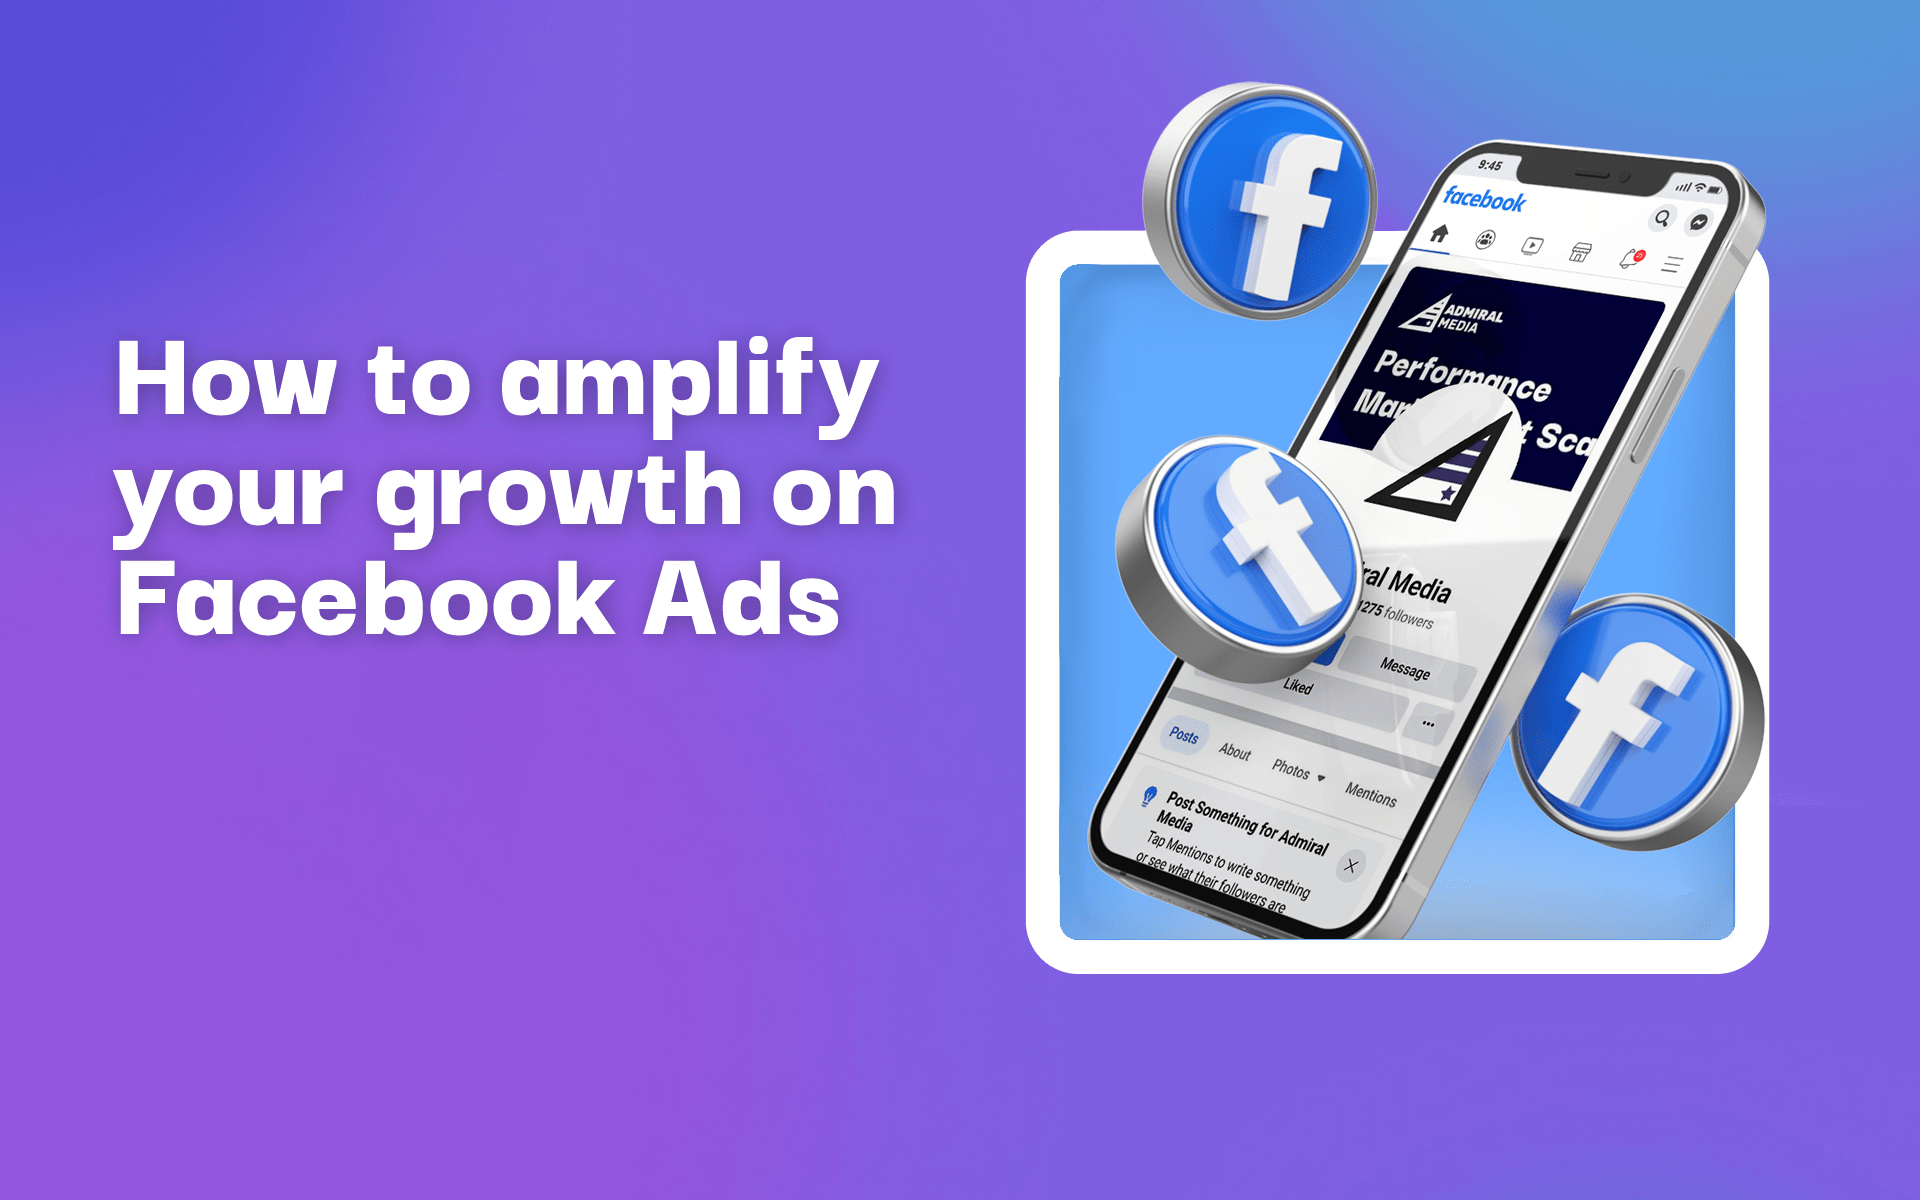 growth on Facebook Ads